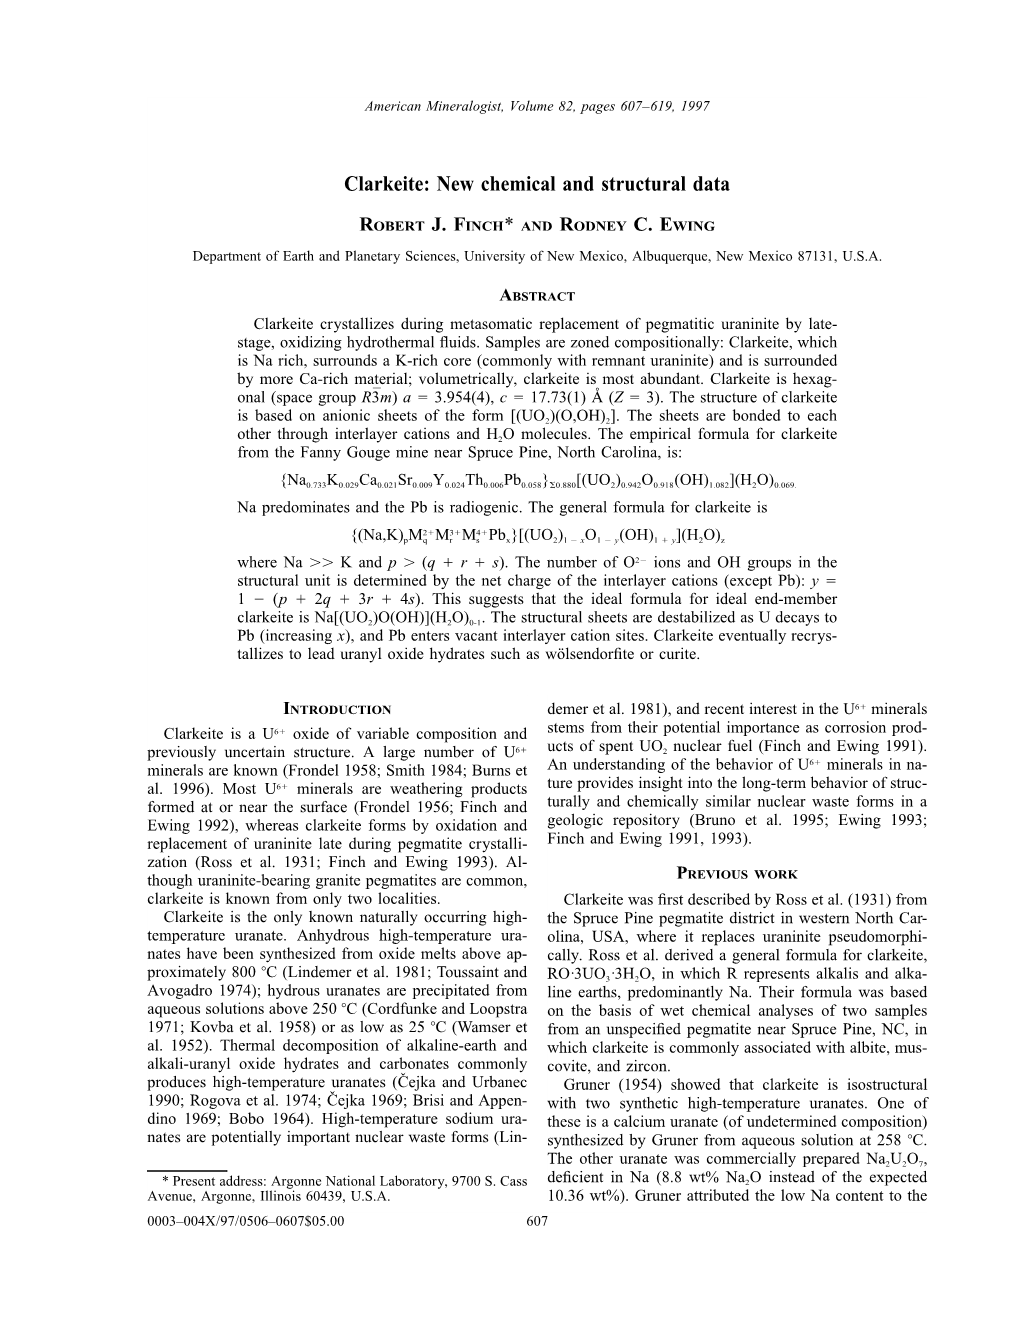 Clarkeite: New Chemical and Structural Data